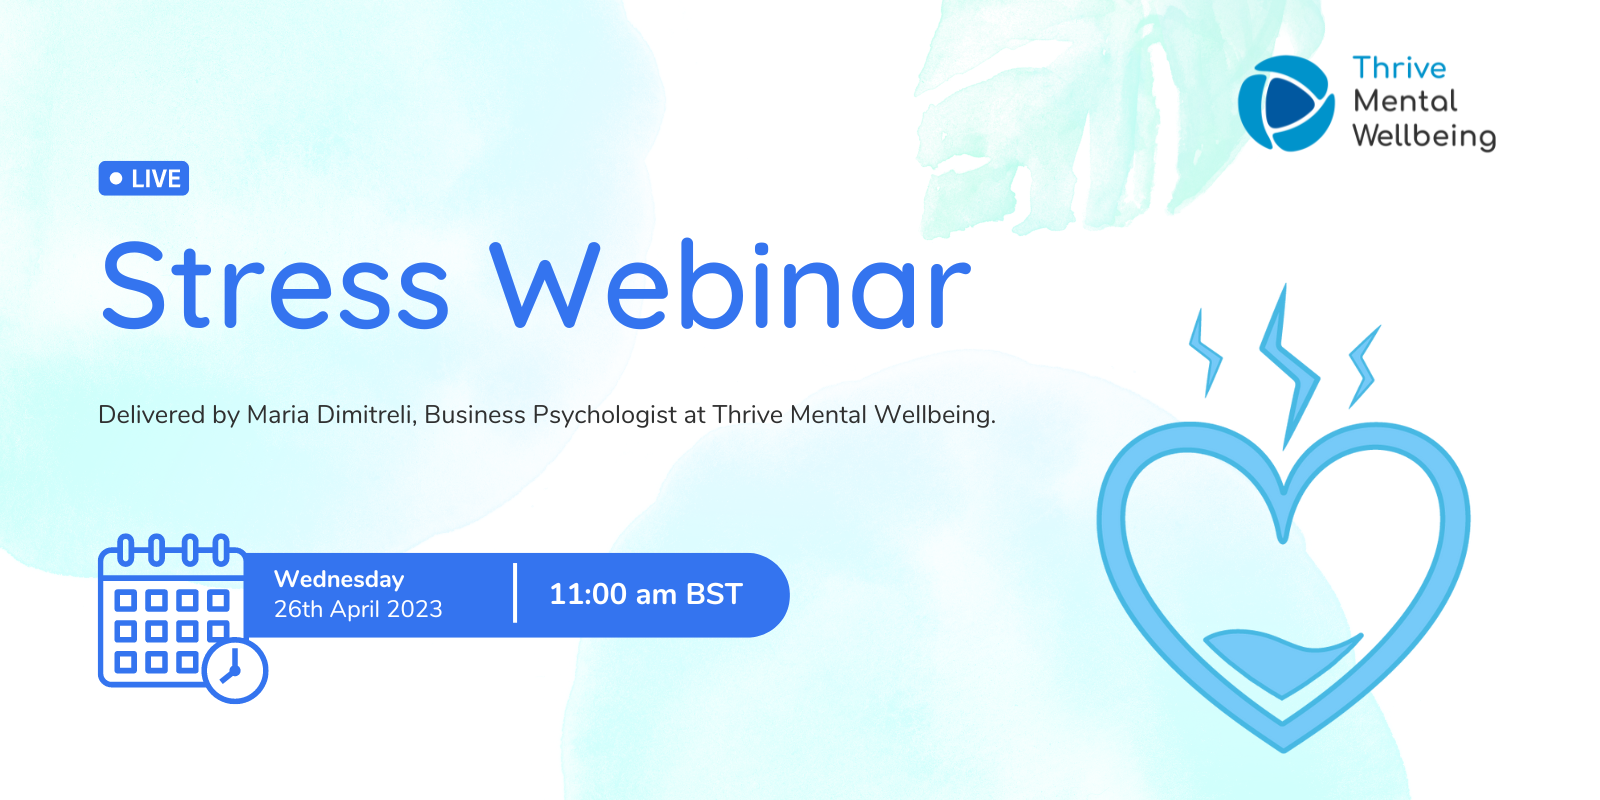 Stress Webinar - Sign up by completing the form below.